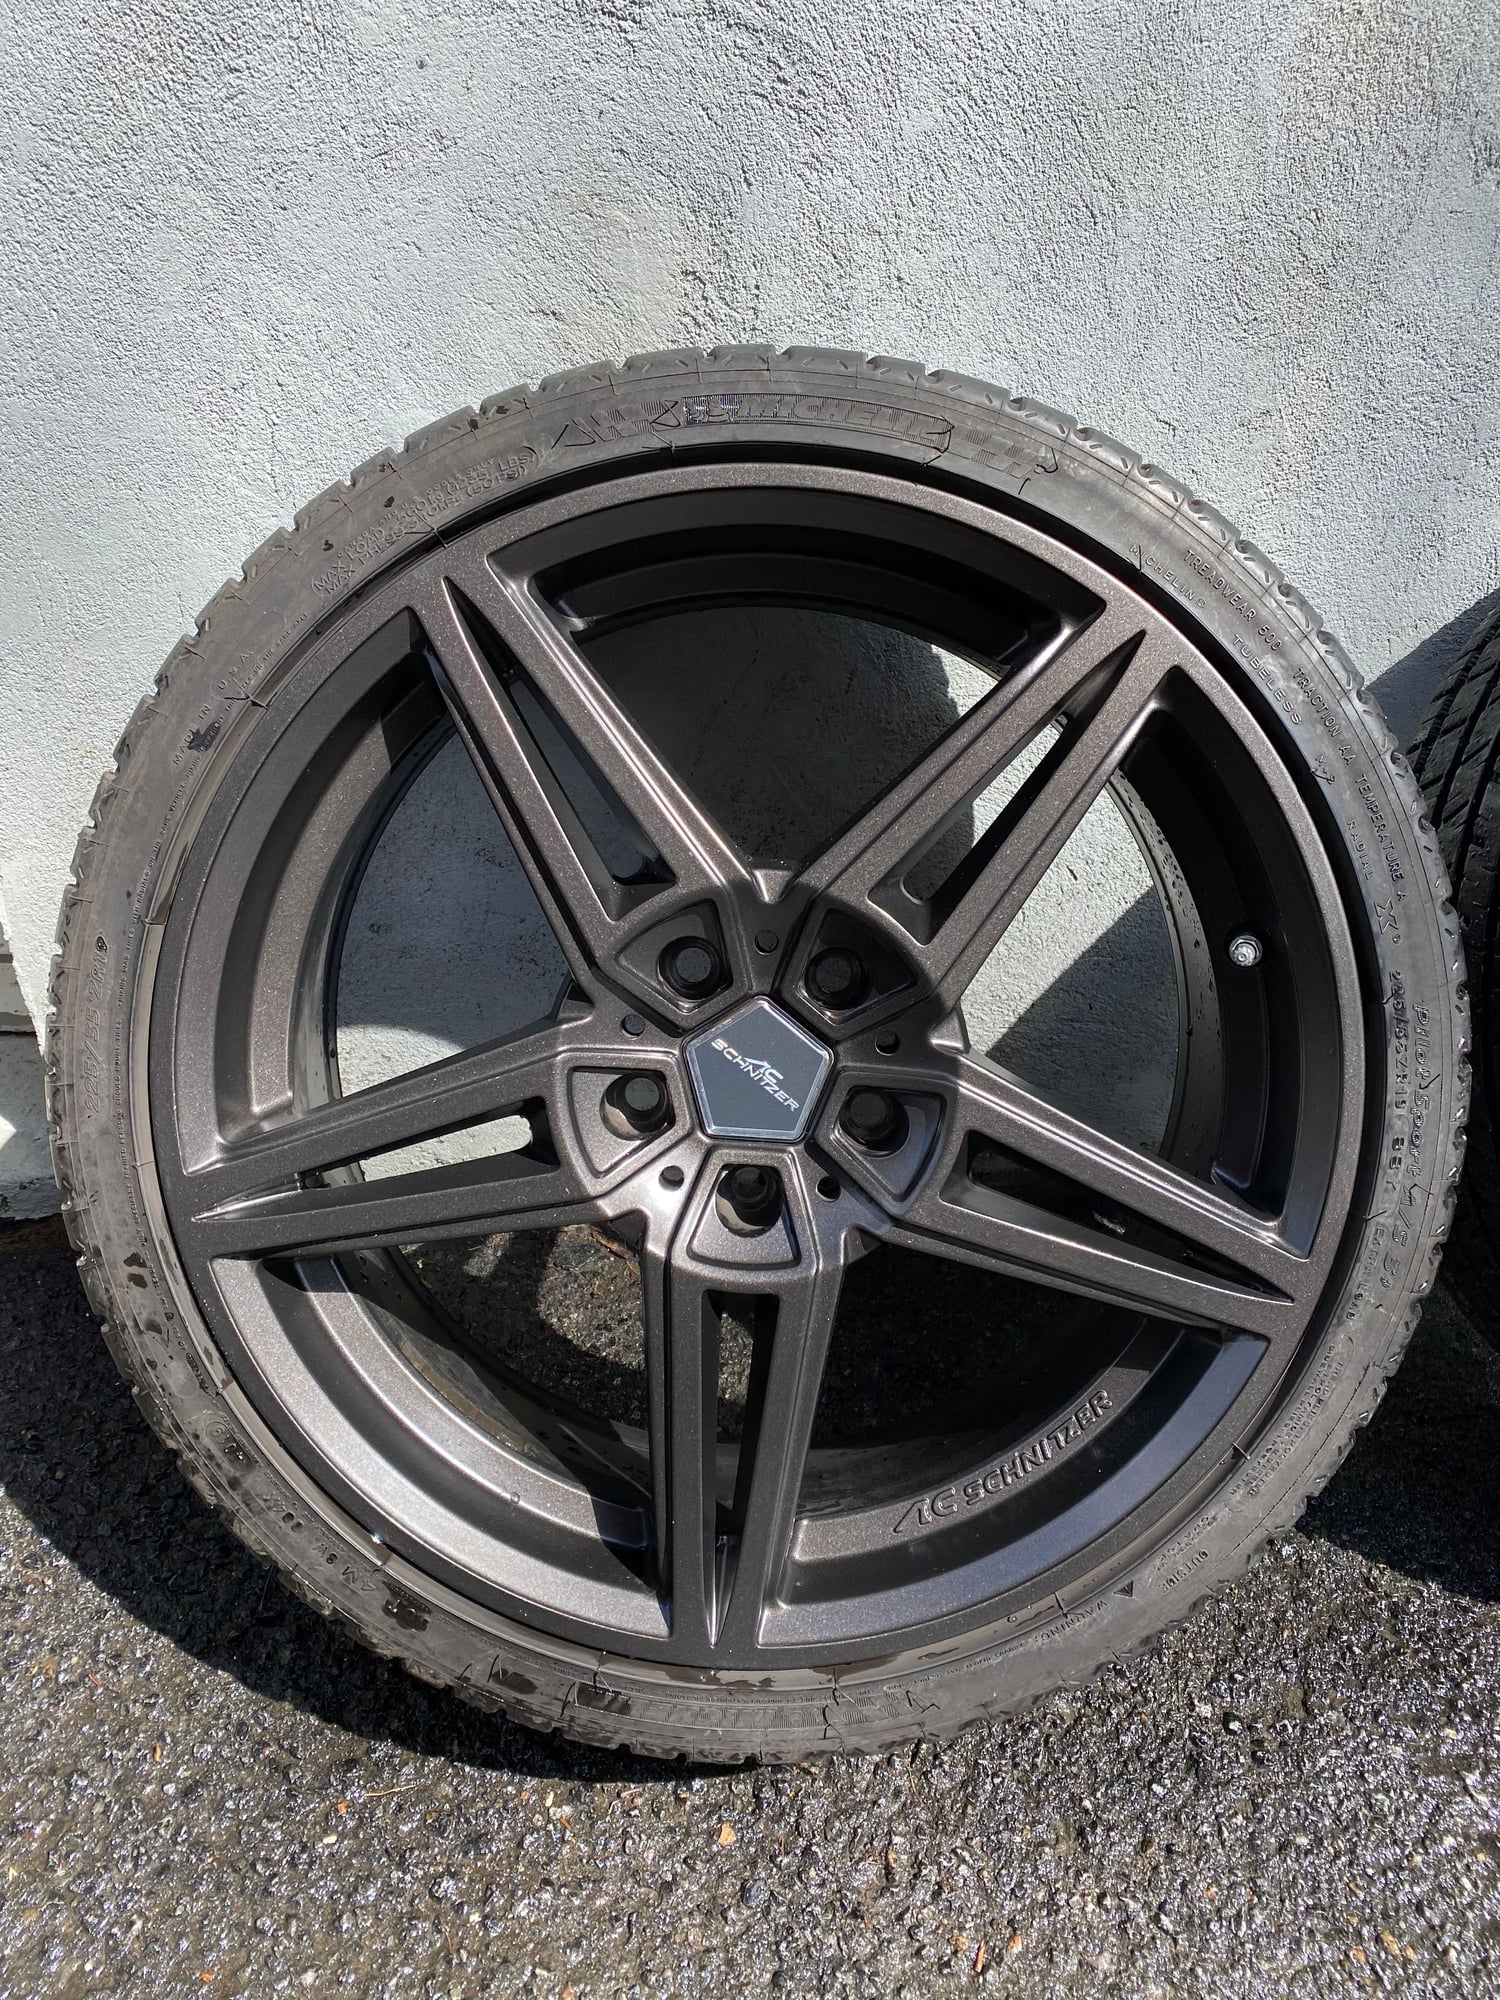 Wheels and Tires/Axles - Rare AC Schnitzer AC1, 19” in anthracite - Used - All Years  All Models - Montreal West, QC H4X1G8, Canada